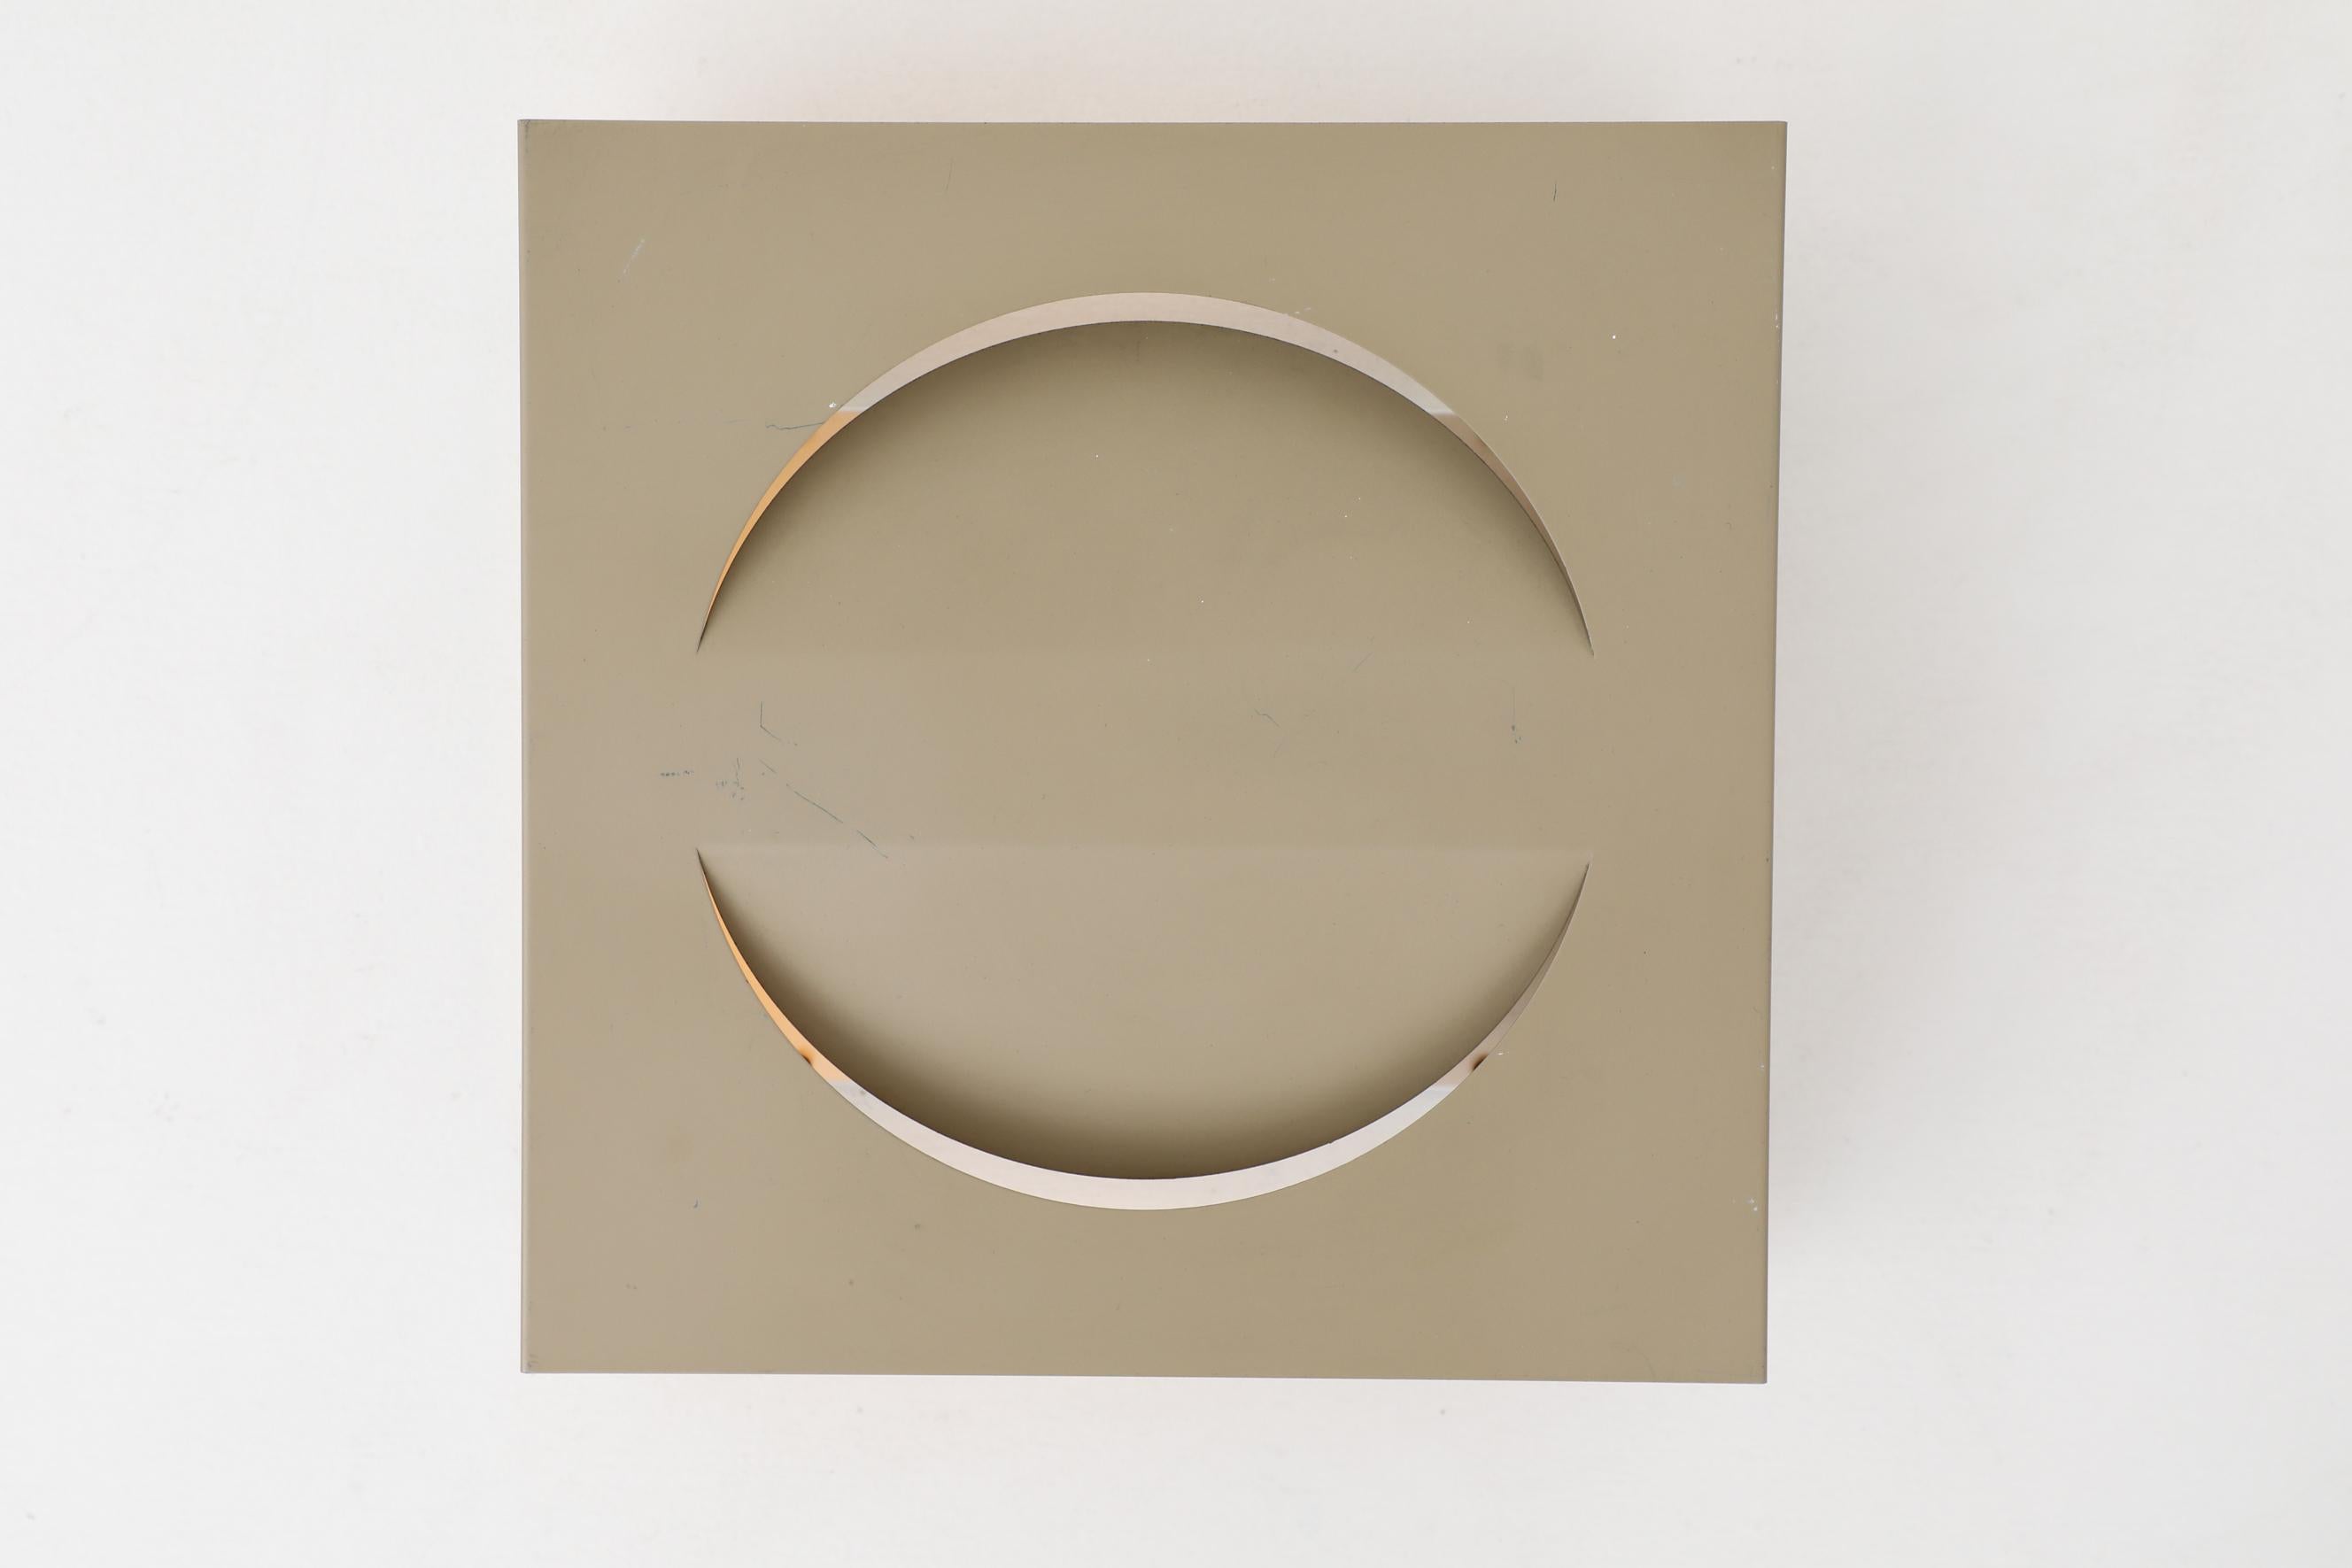 RAAK manufactured, square beige enameled metal sconce with half circle cut outs. Takes one bulb, not included. In original condition with visible wear, consistent with its age and use.